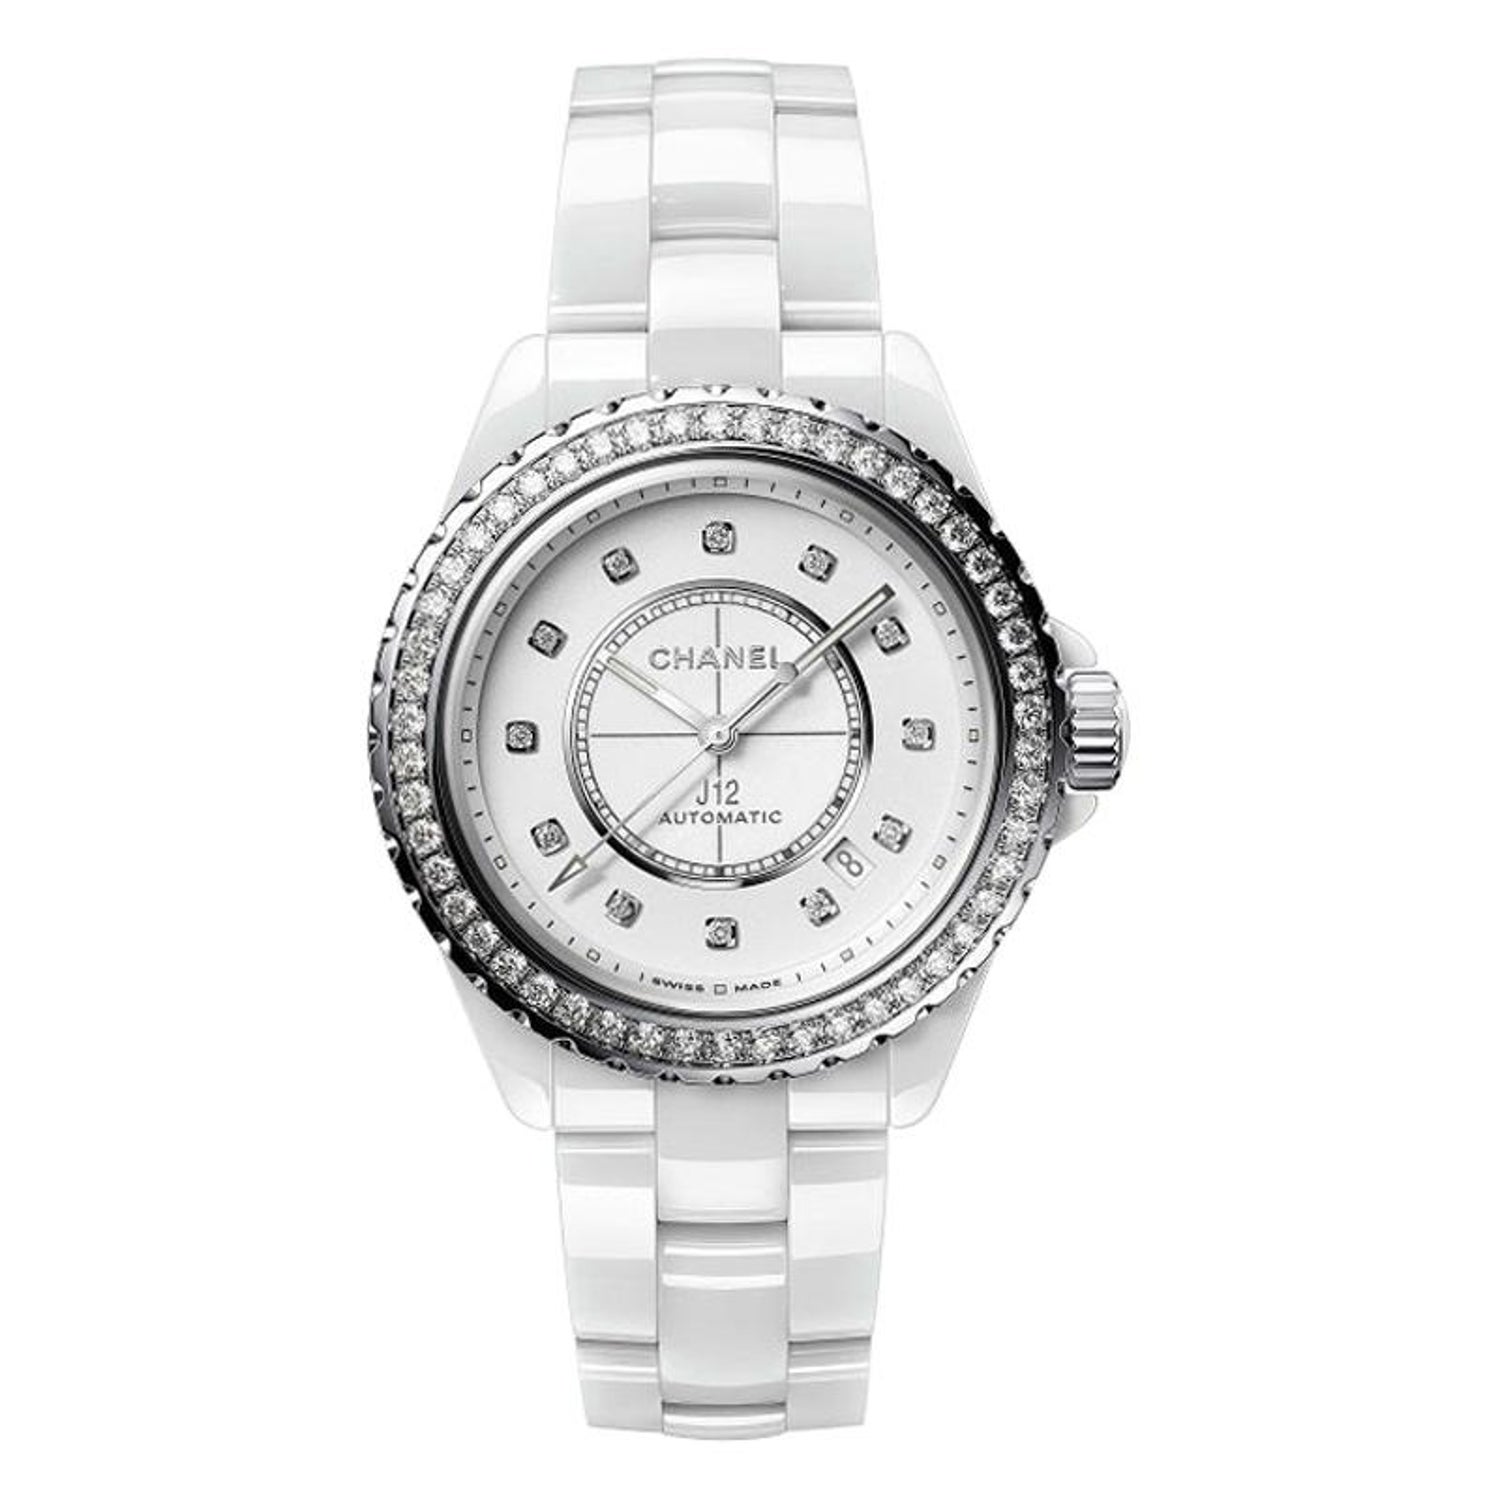 Authentic women's Chanel j12 ceramic watch purchased at the Paris  flagship store